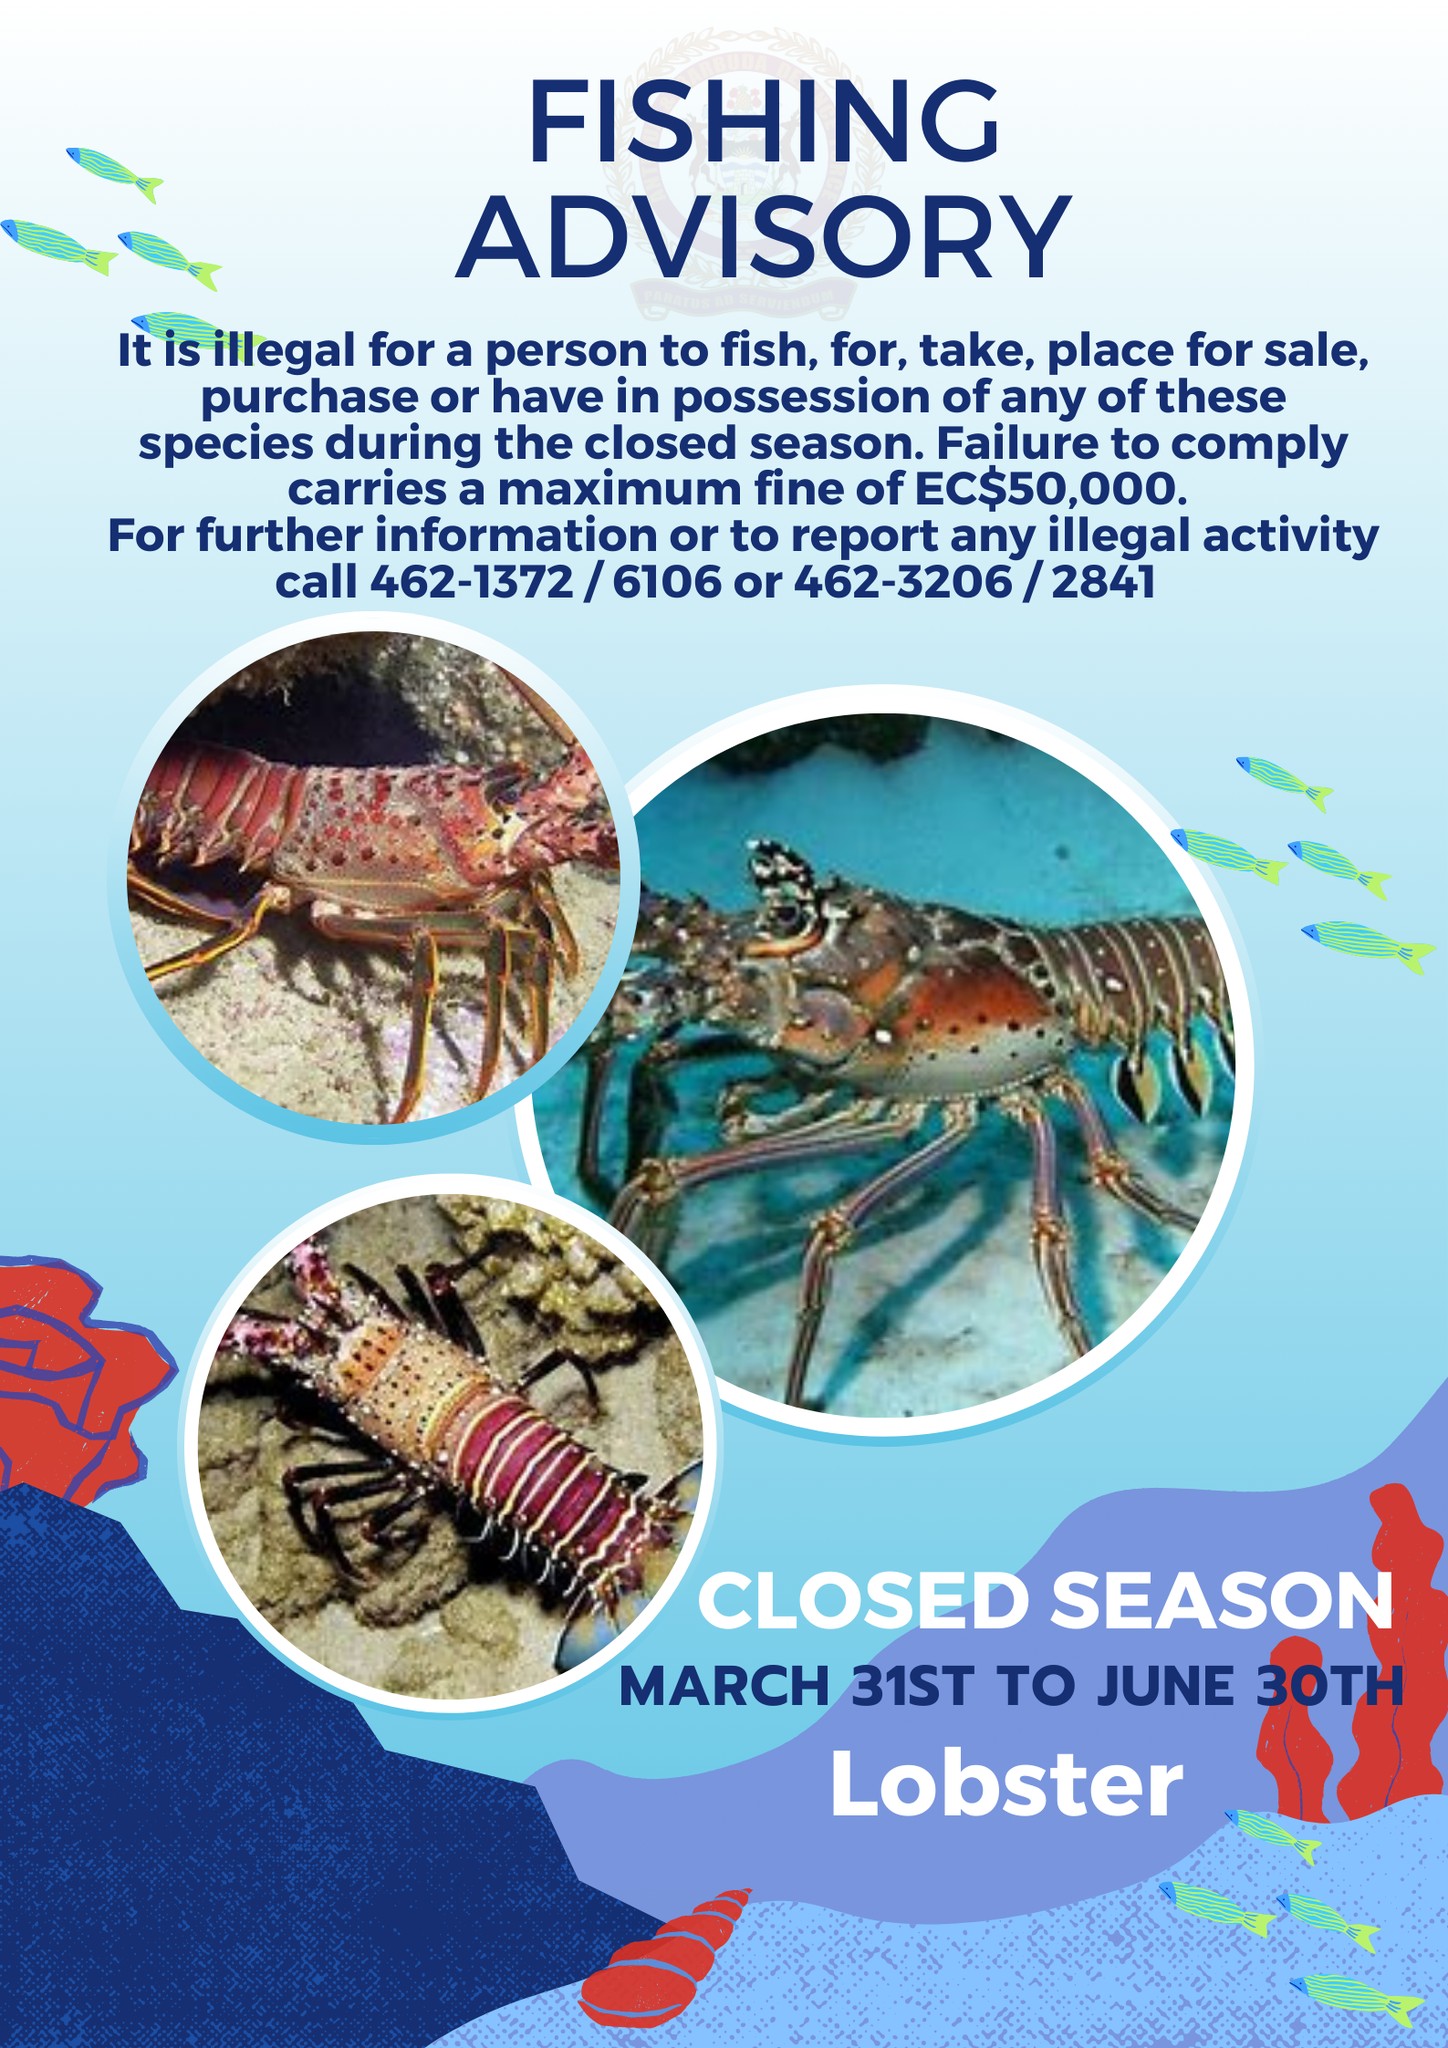 Lobster Closed Season March 31st to June 30th, Offenders Face 50k fine -  Antigua News Room